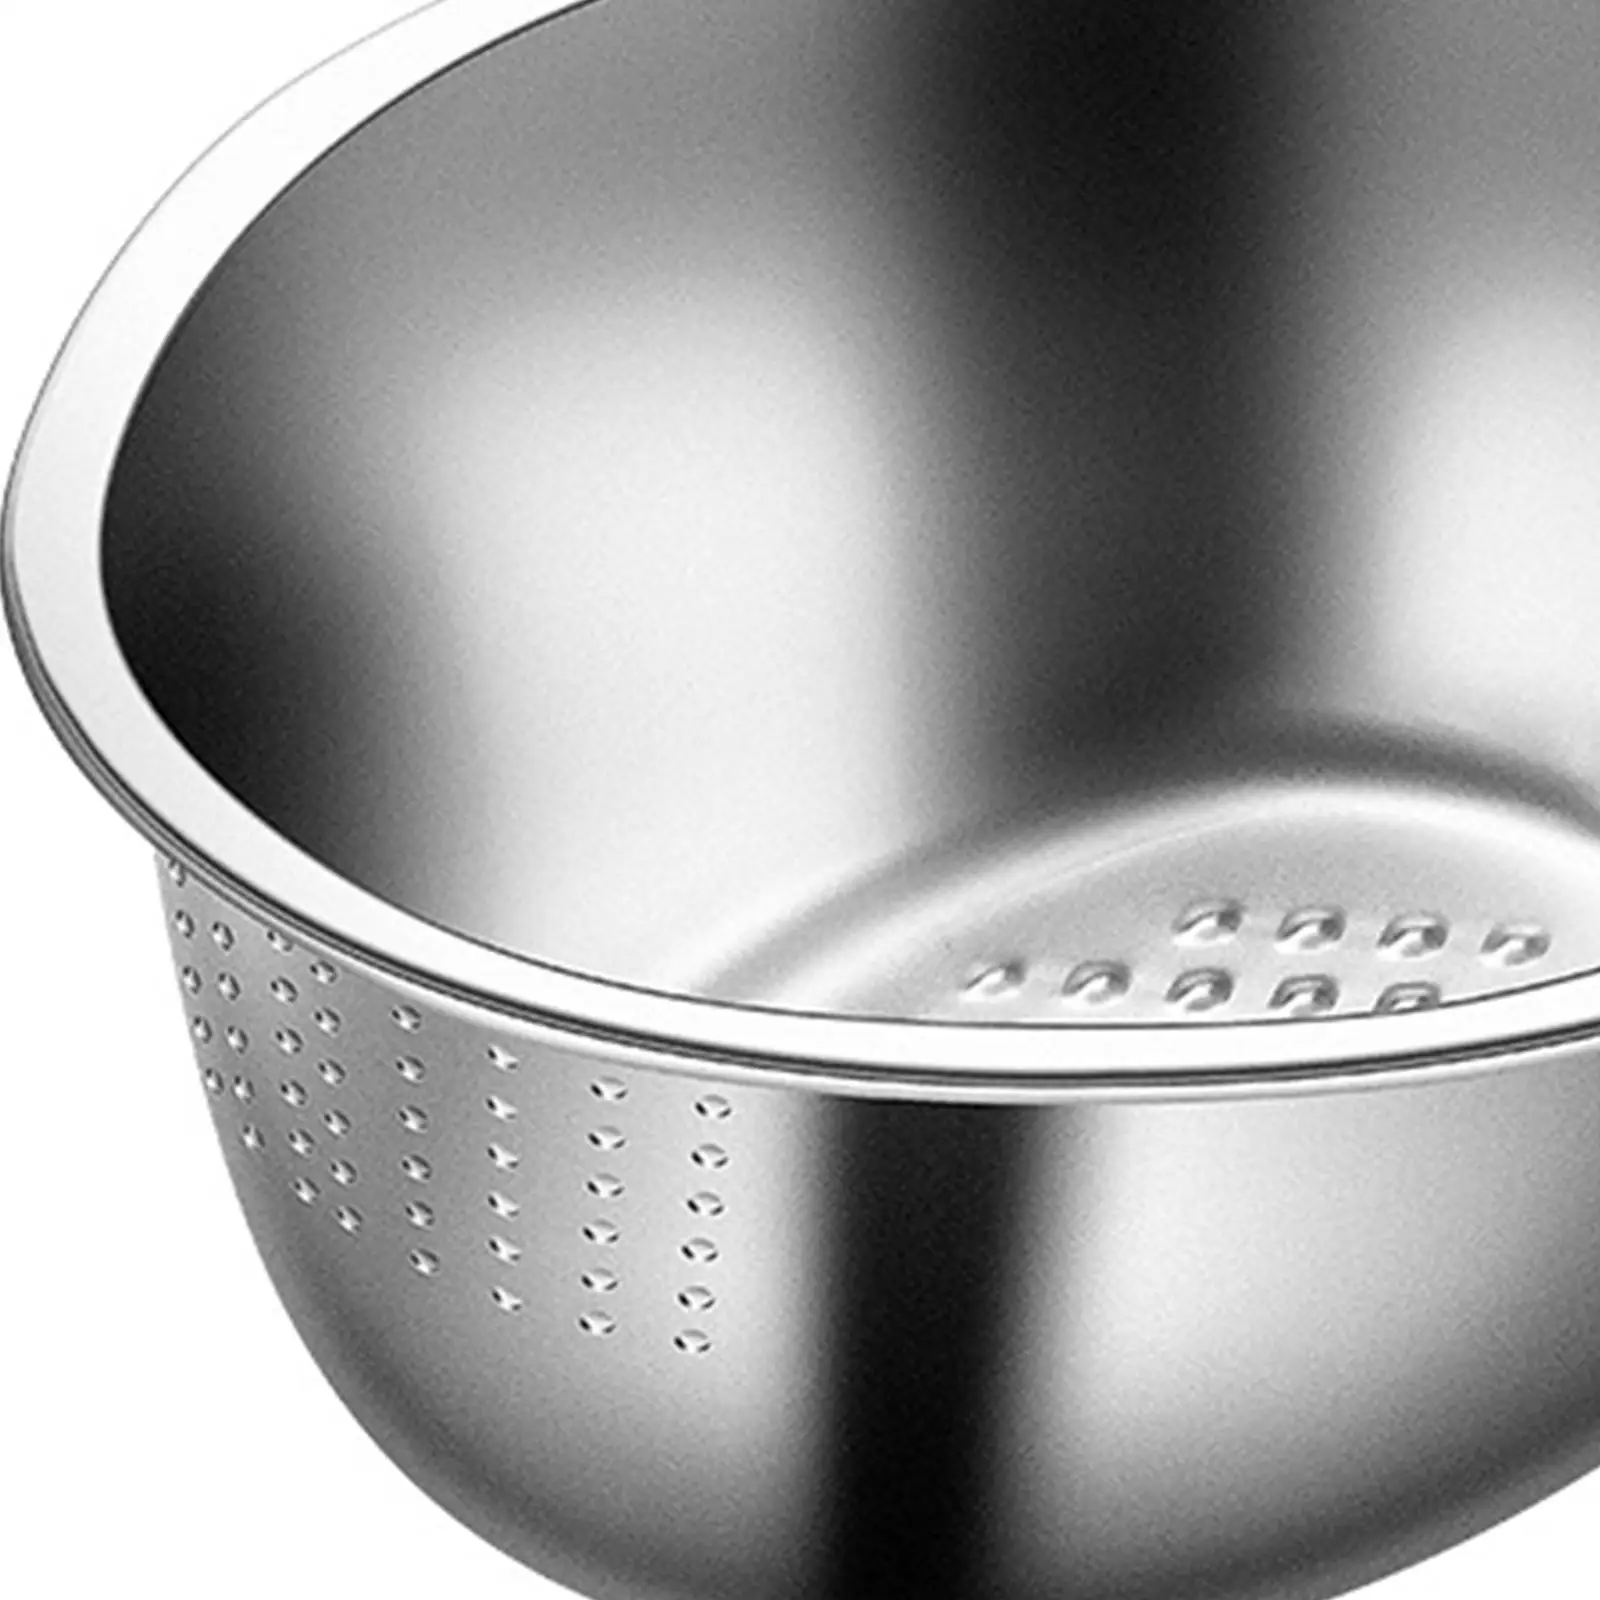 Vegetables Drain Basket Stainless Steel Drainer Basket Rice Washer Strainer Bowl Colander for Grapes Carrots Tomatoes